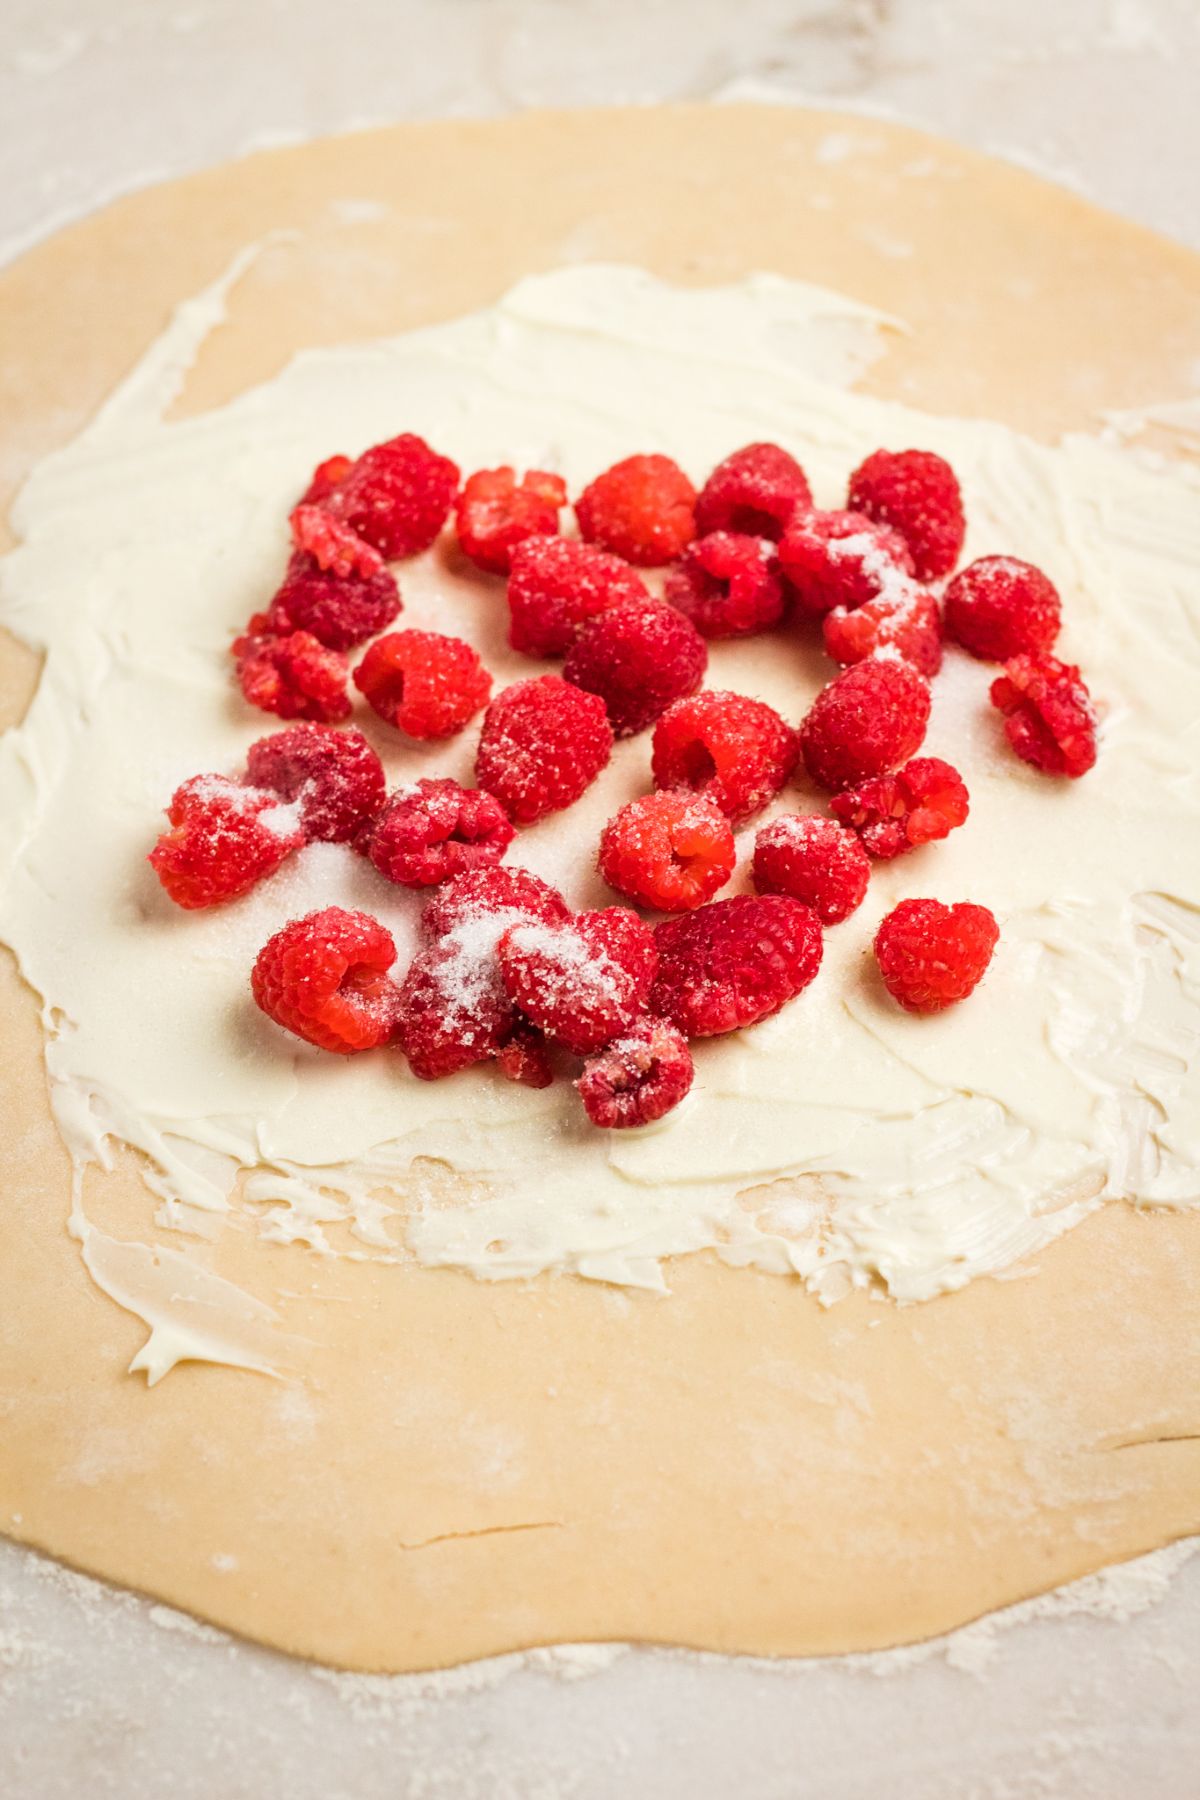 Pie dough with cream cheese and raspberries